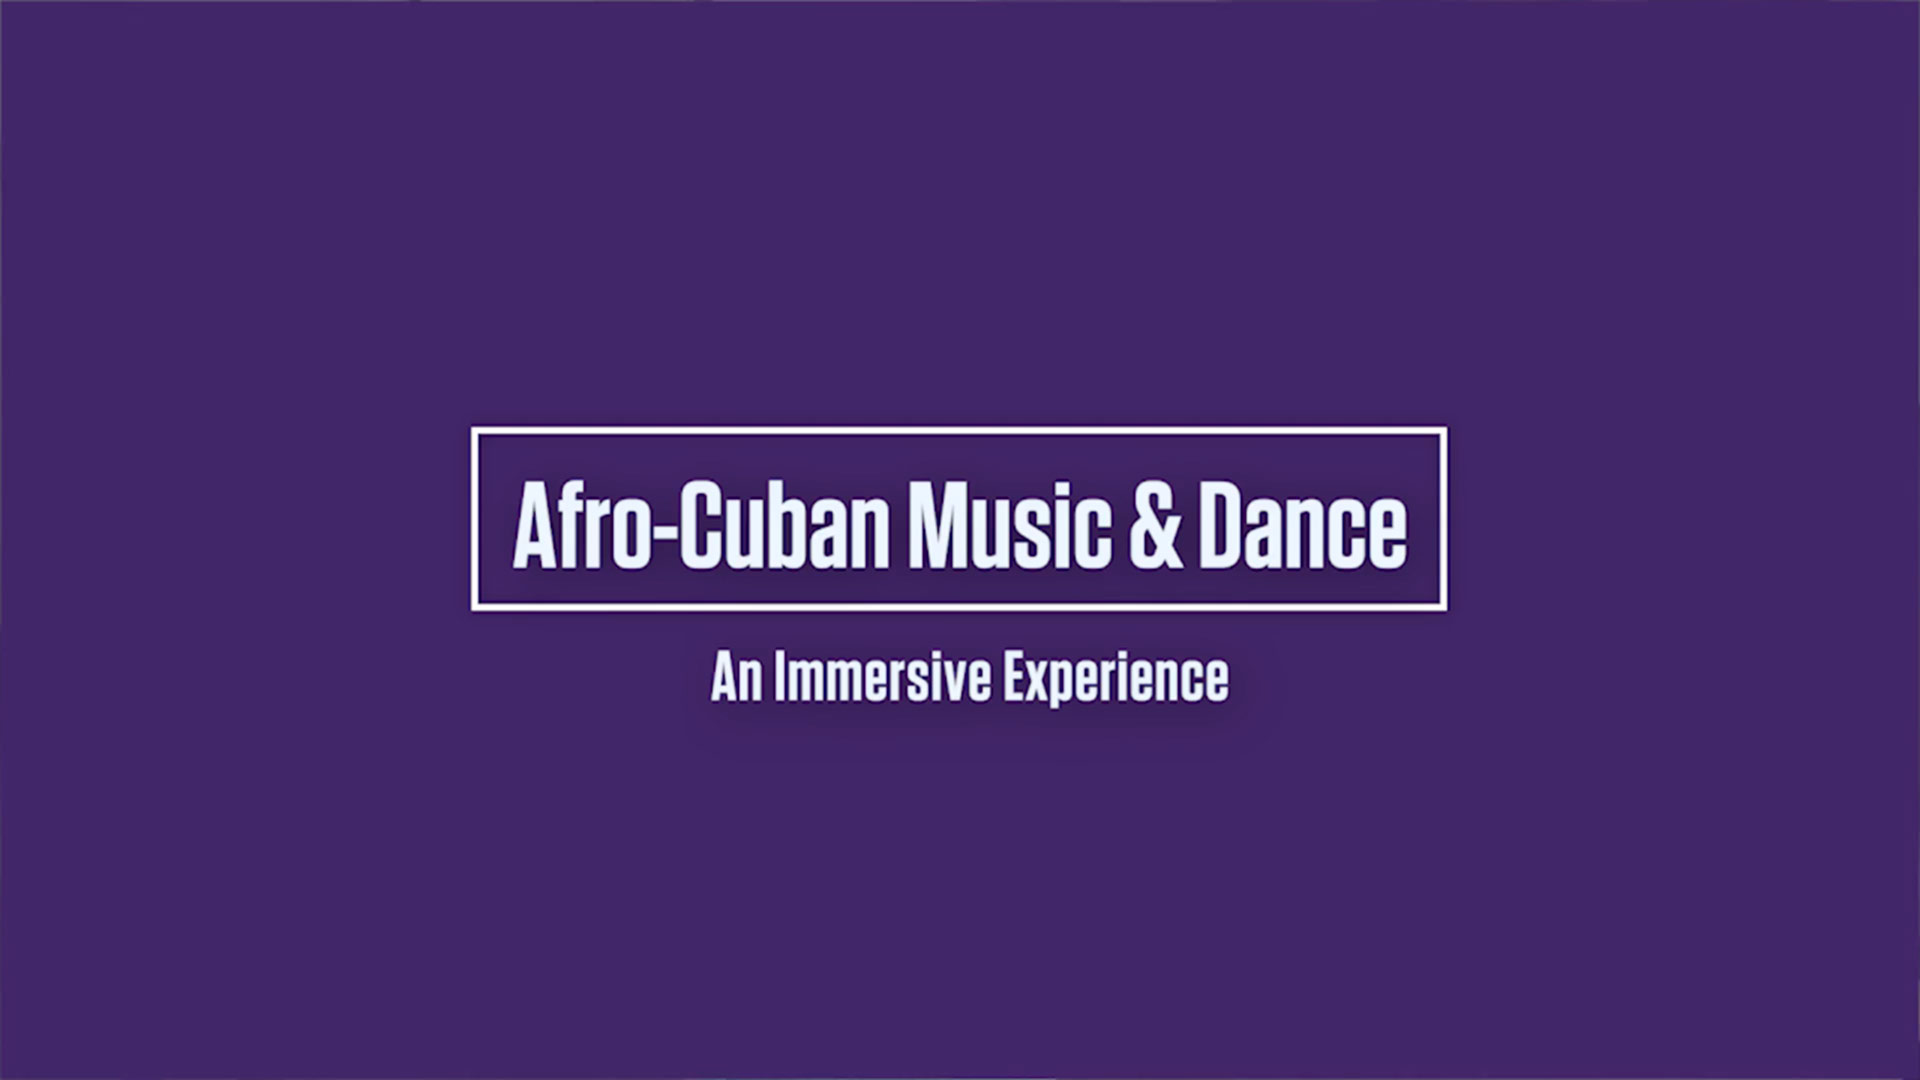 Afro-Cuban Music & Dance Immersive Experience